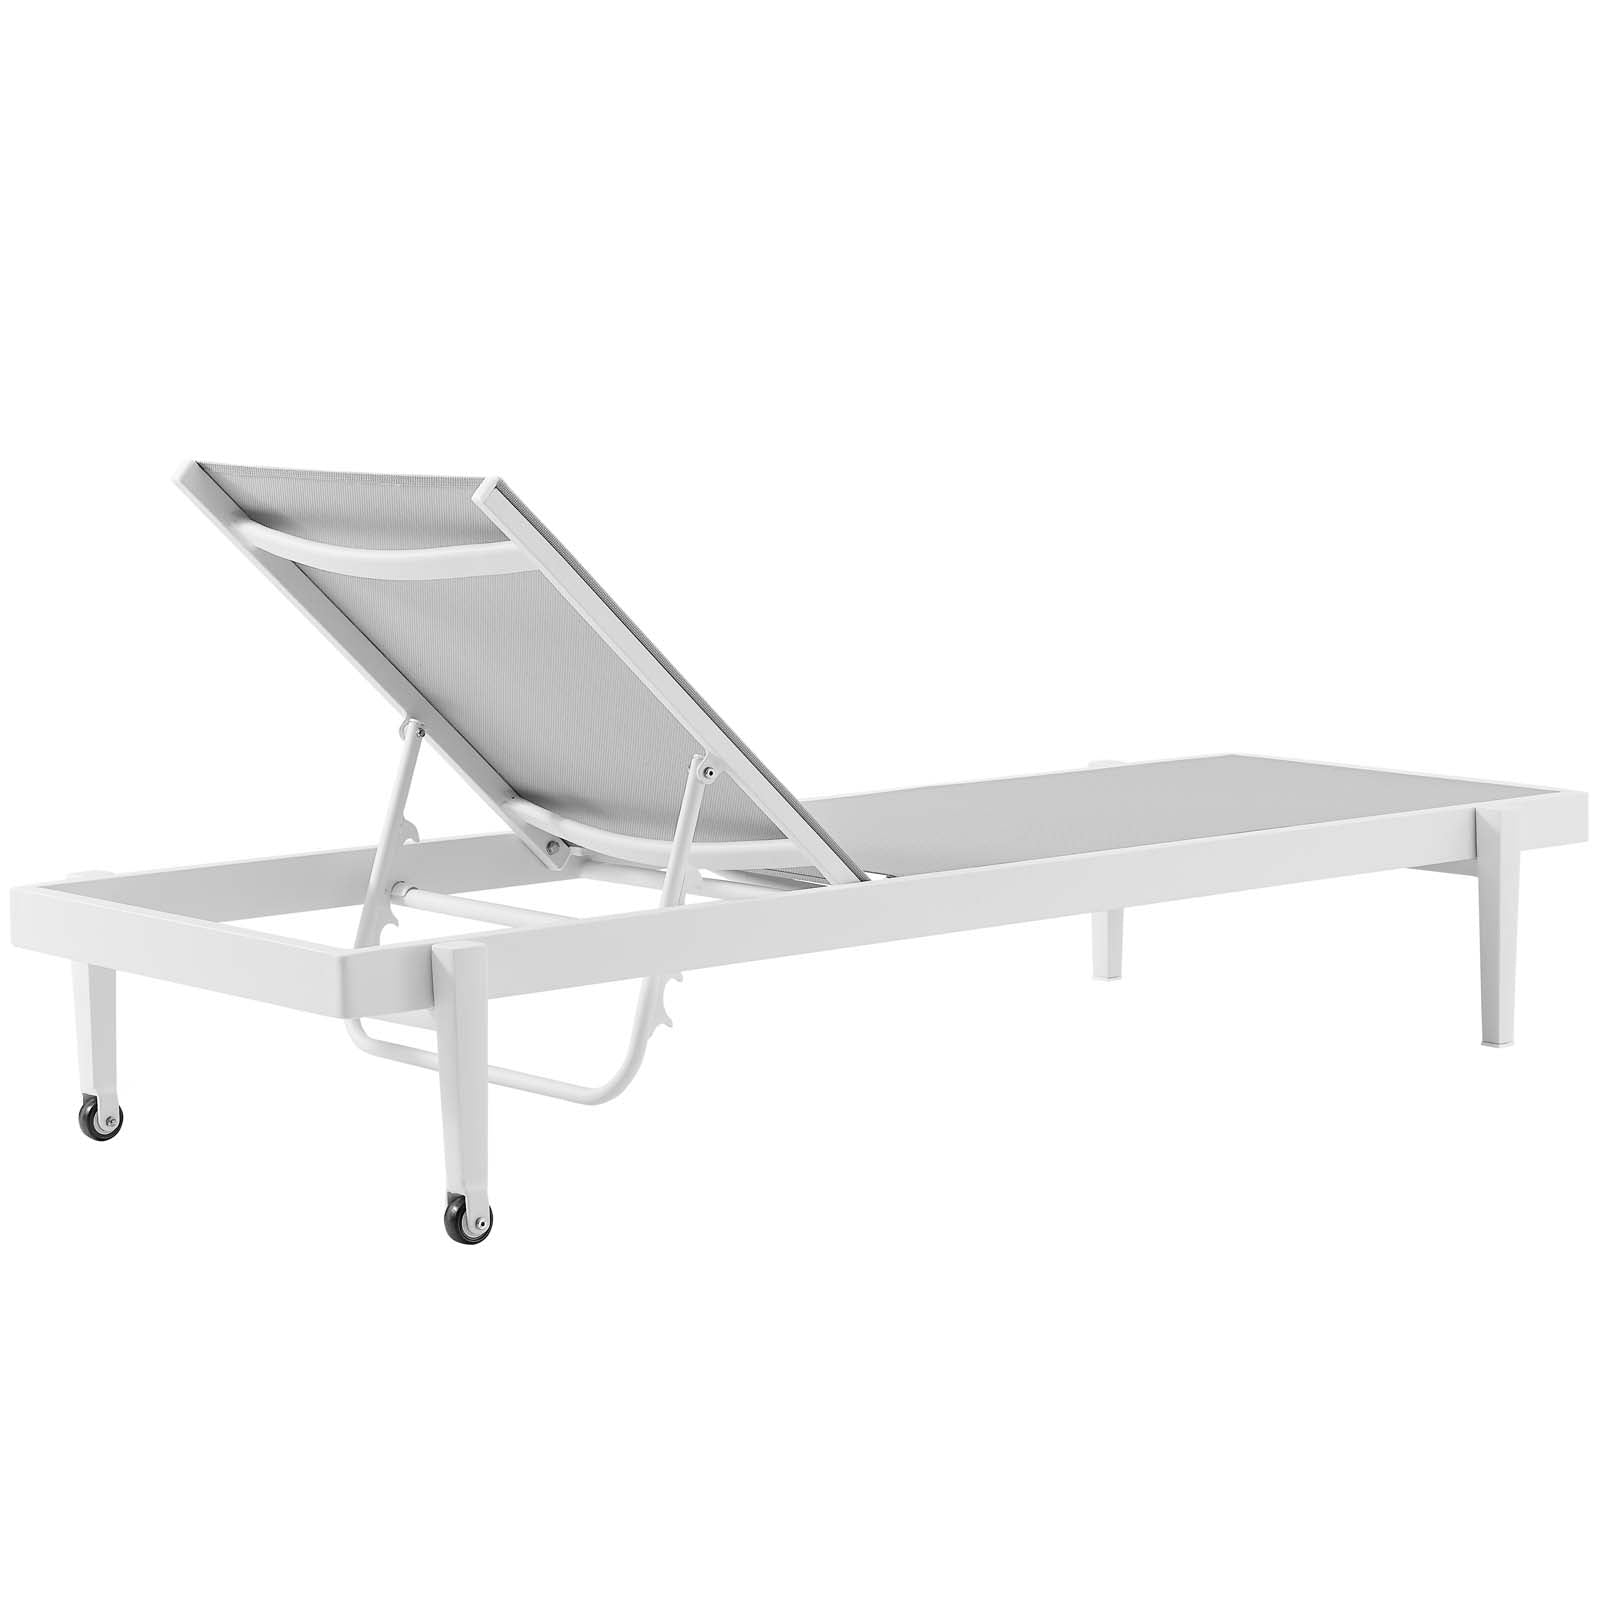 Modway Outdoor Loungers - Charleston Outdoor Patio Aluminum Chaise Lounge Chair Set of 2 White Gray